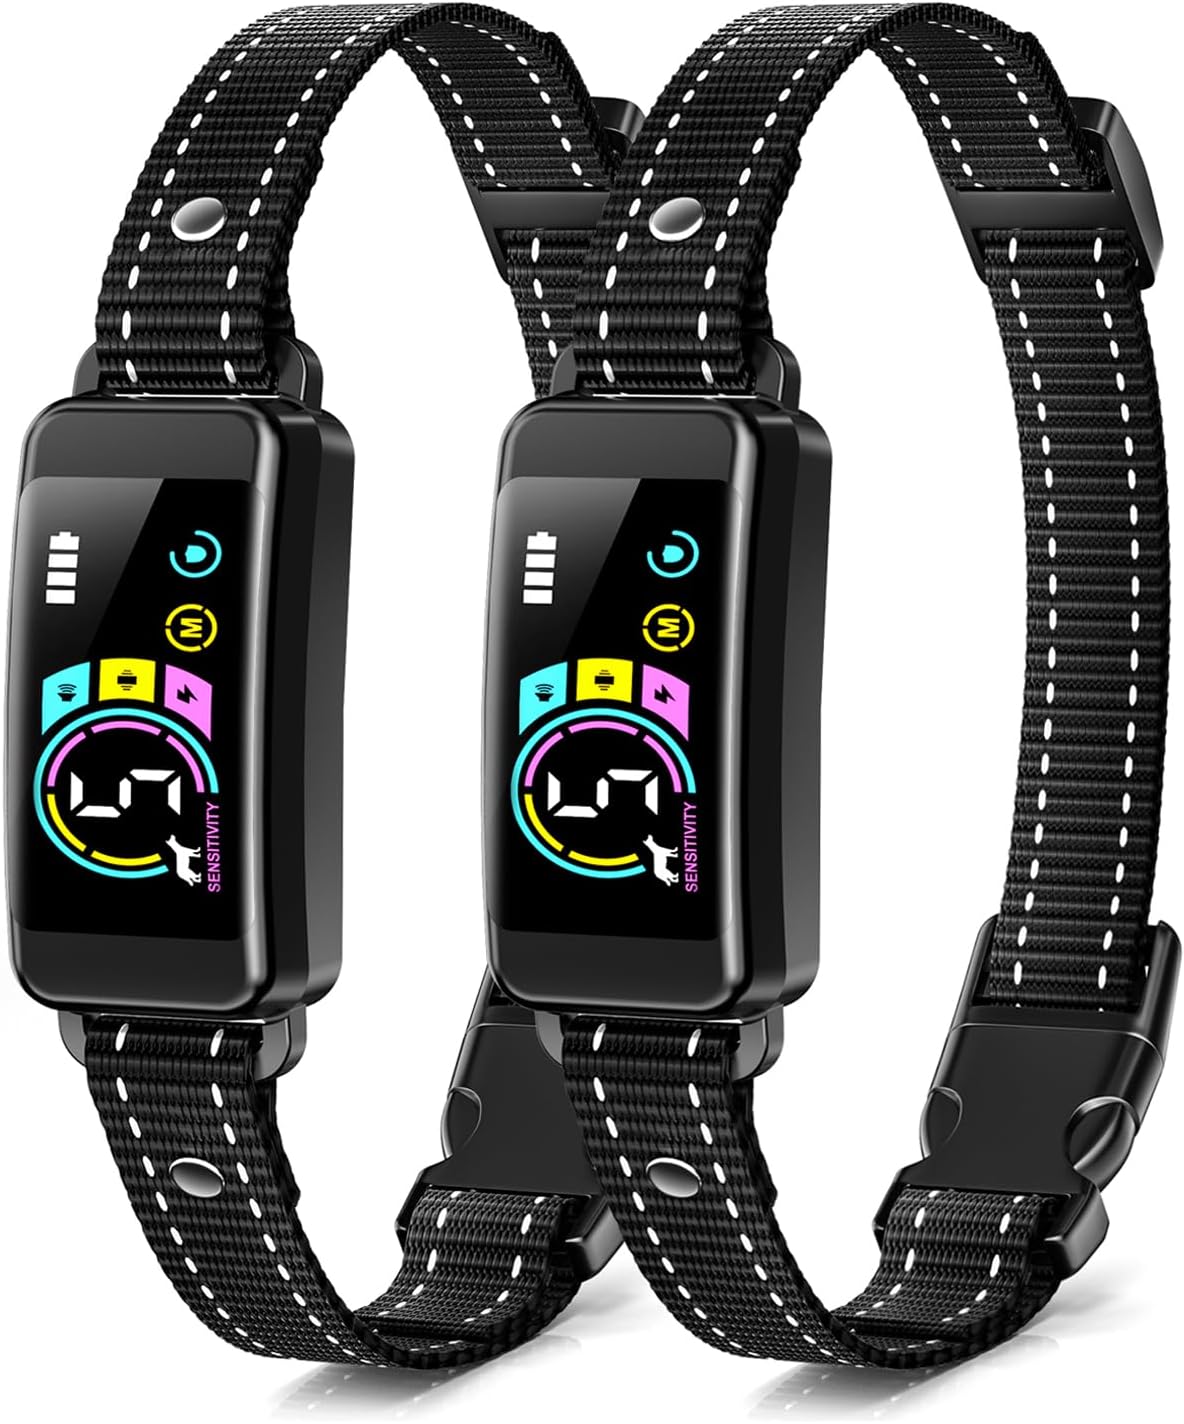 Bark Collar, 2 Pack Dog Bark Collar for Large Medium Small Dogs, Rechargeable Training Collar with Beep Vibration Shock Collar with 5 Adjustable Sensitivity, Anti Barking Device for Dogs